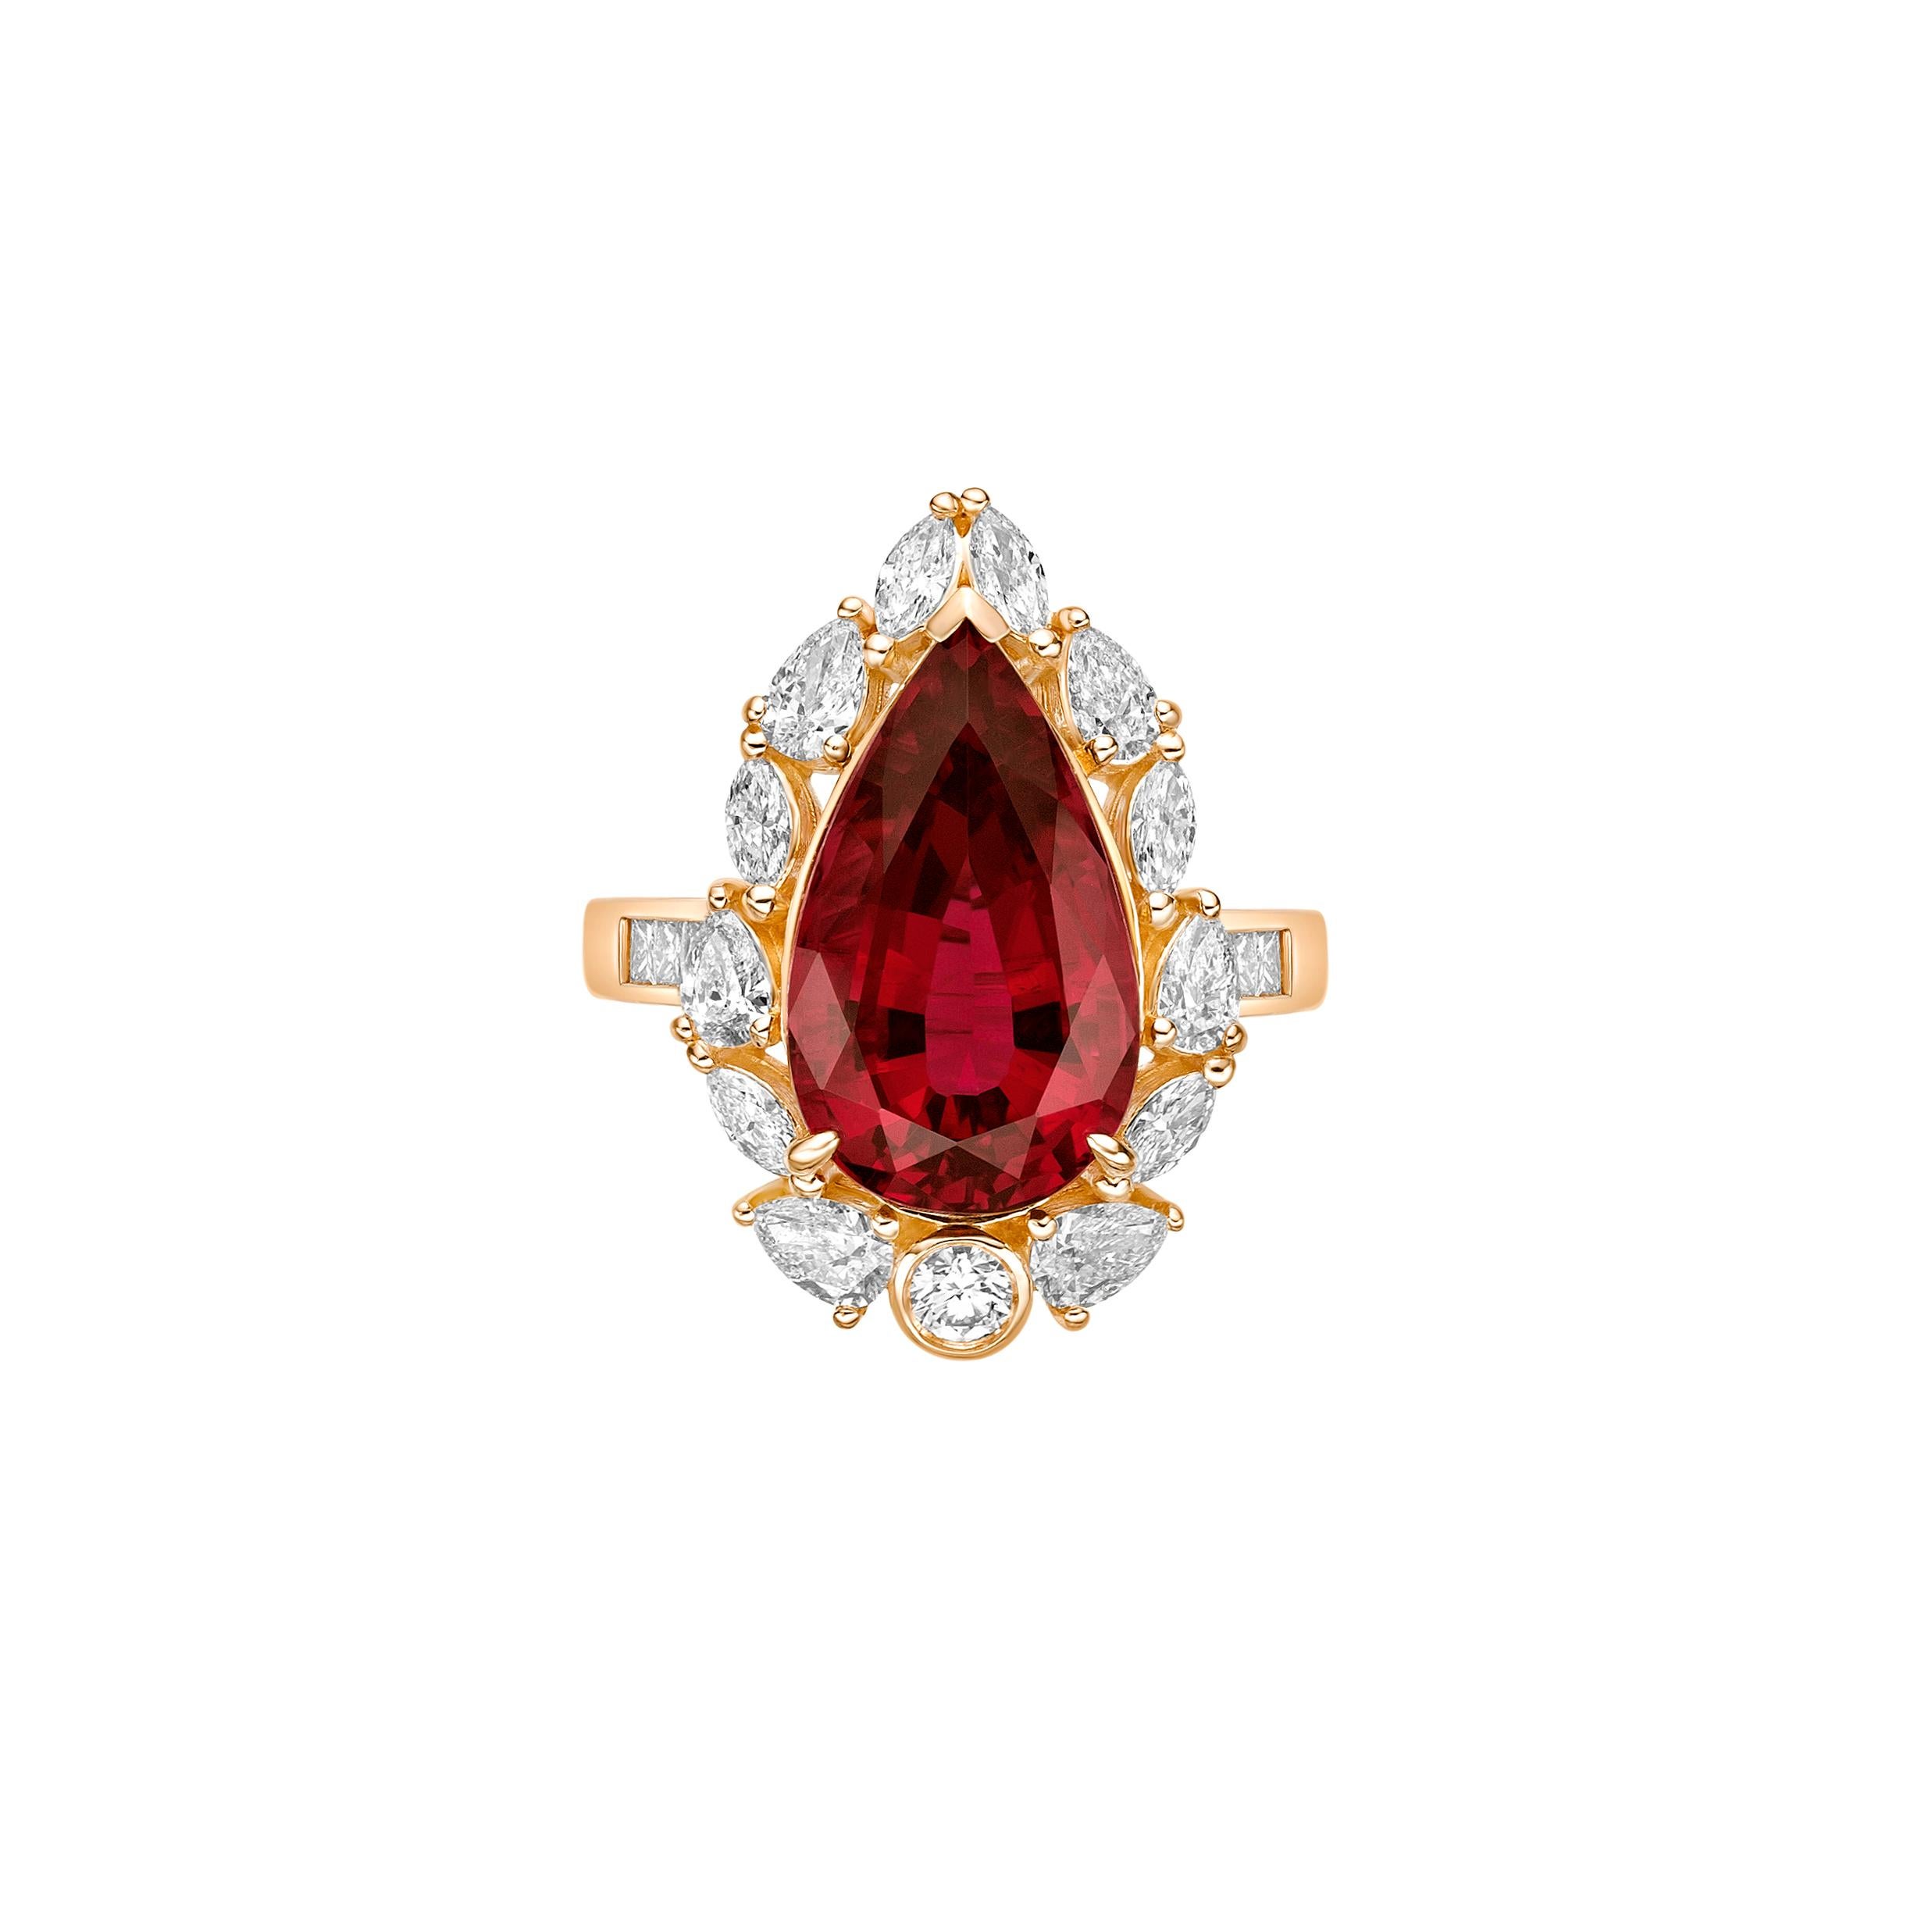 Contemporary 6.991 Carat Rubelite Fancy Ring in 18Karat Yellow Gold with White Diamond. For Sale